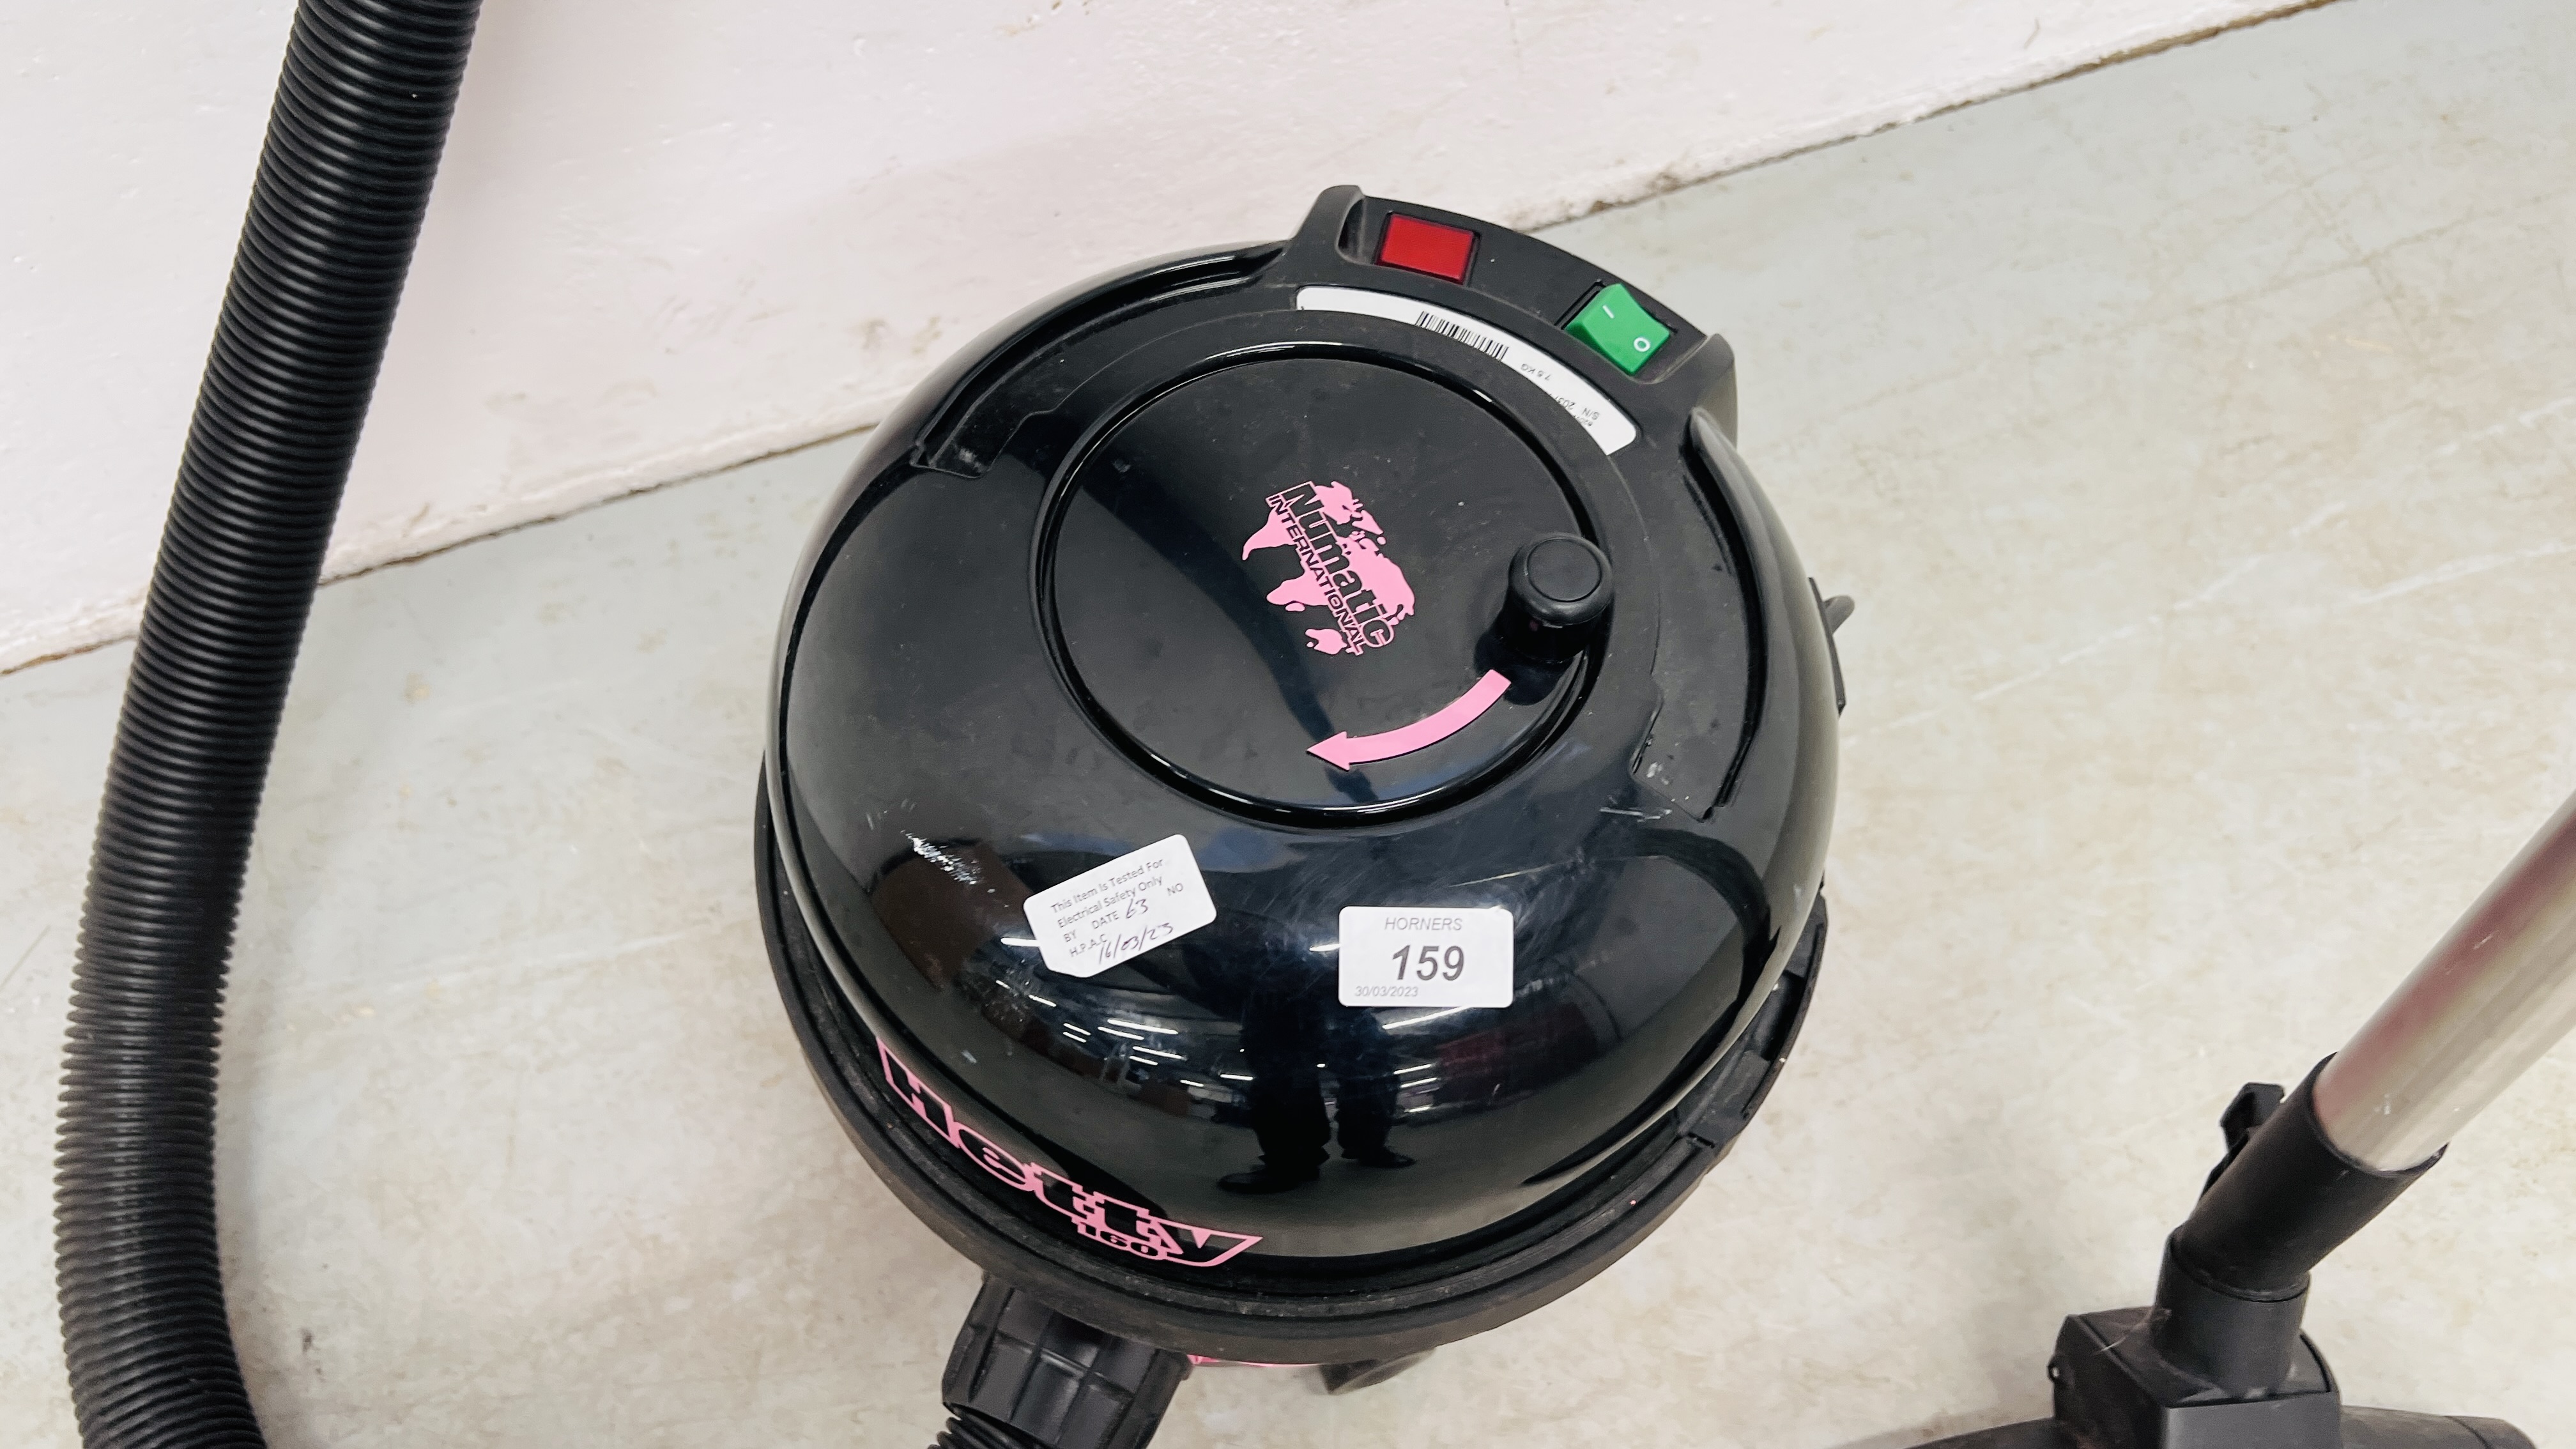 PNEUMATIC "HETTY" VACUUM CLEANER - SOLD AS SEEN. - Image 3 of 4